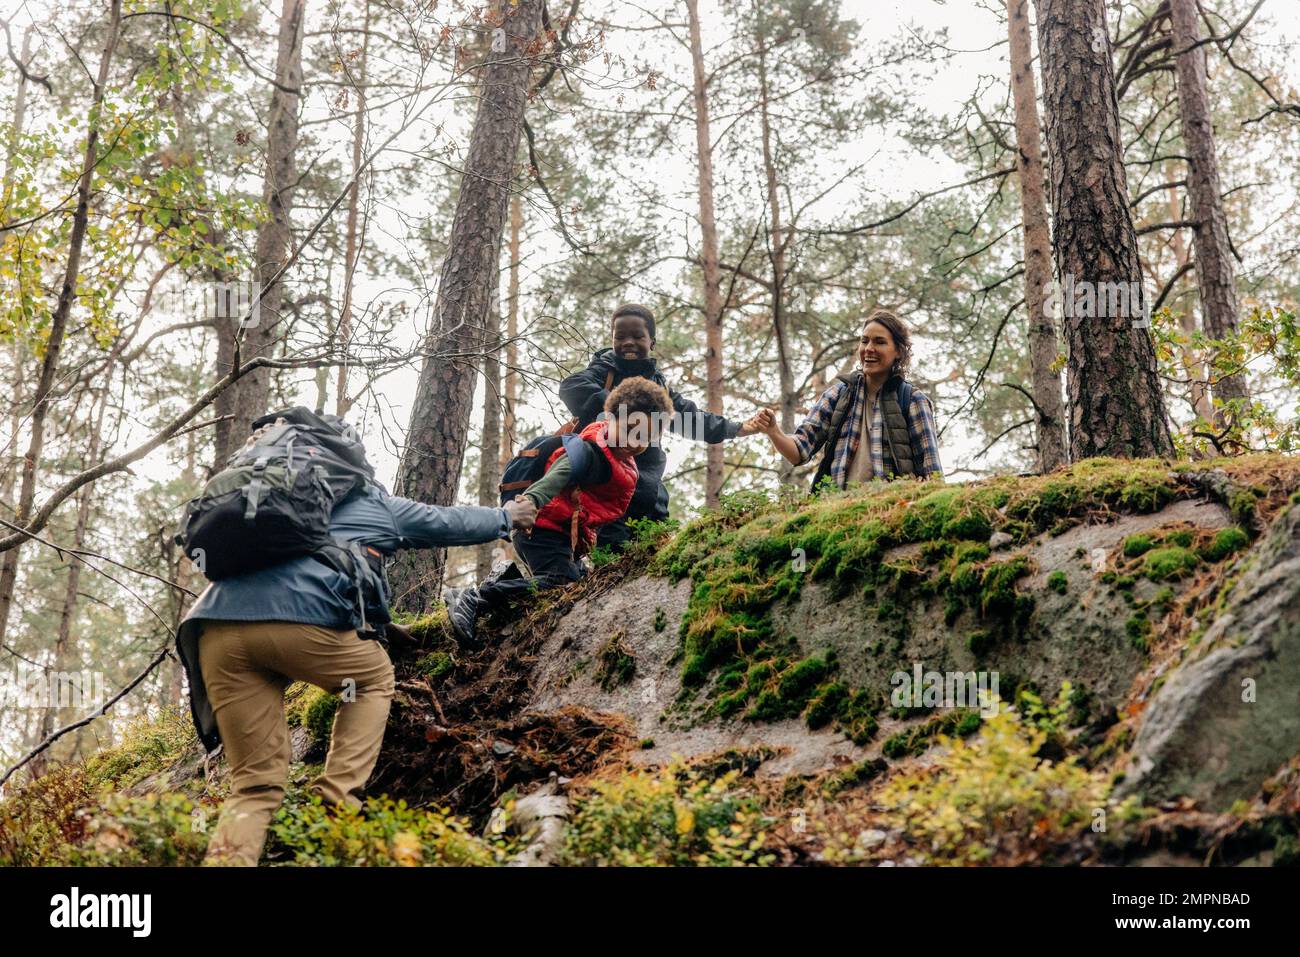 Family helping father while climbing during hiking in forest Stock Photo